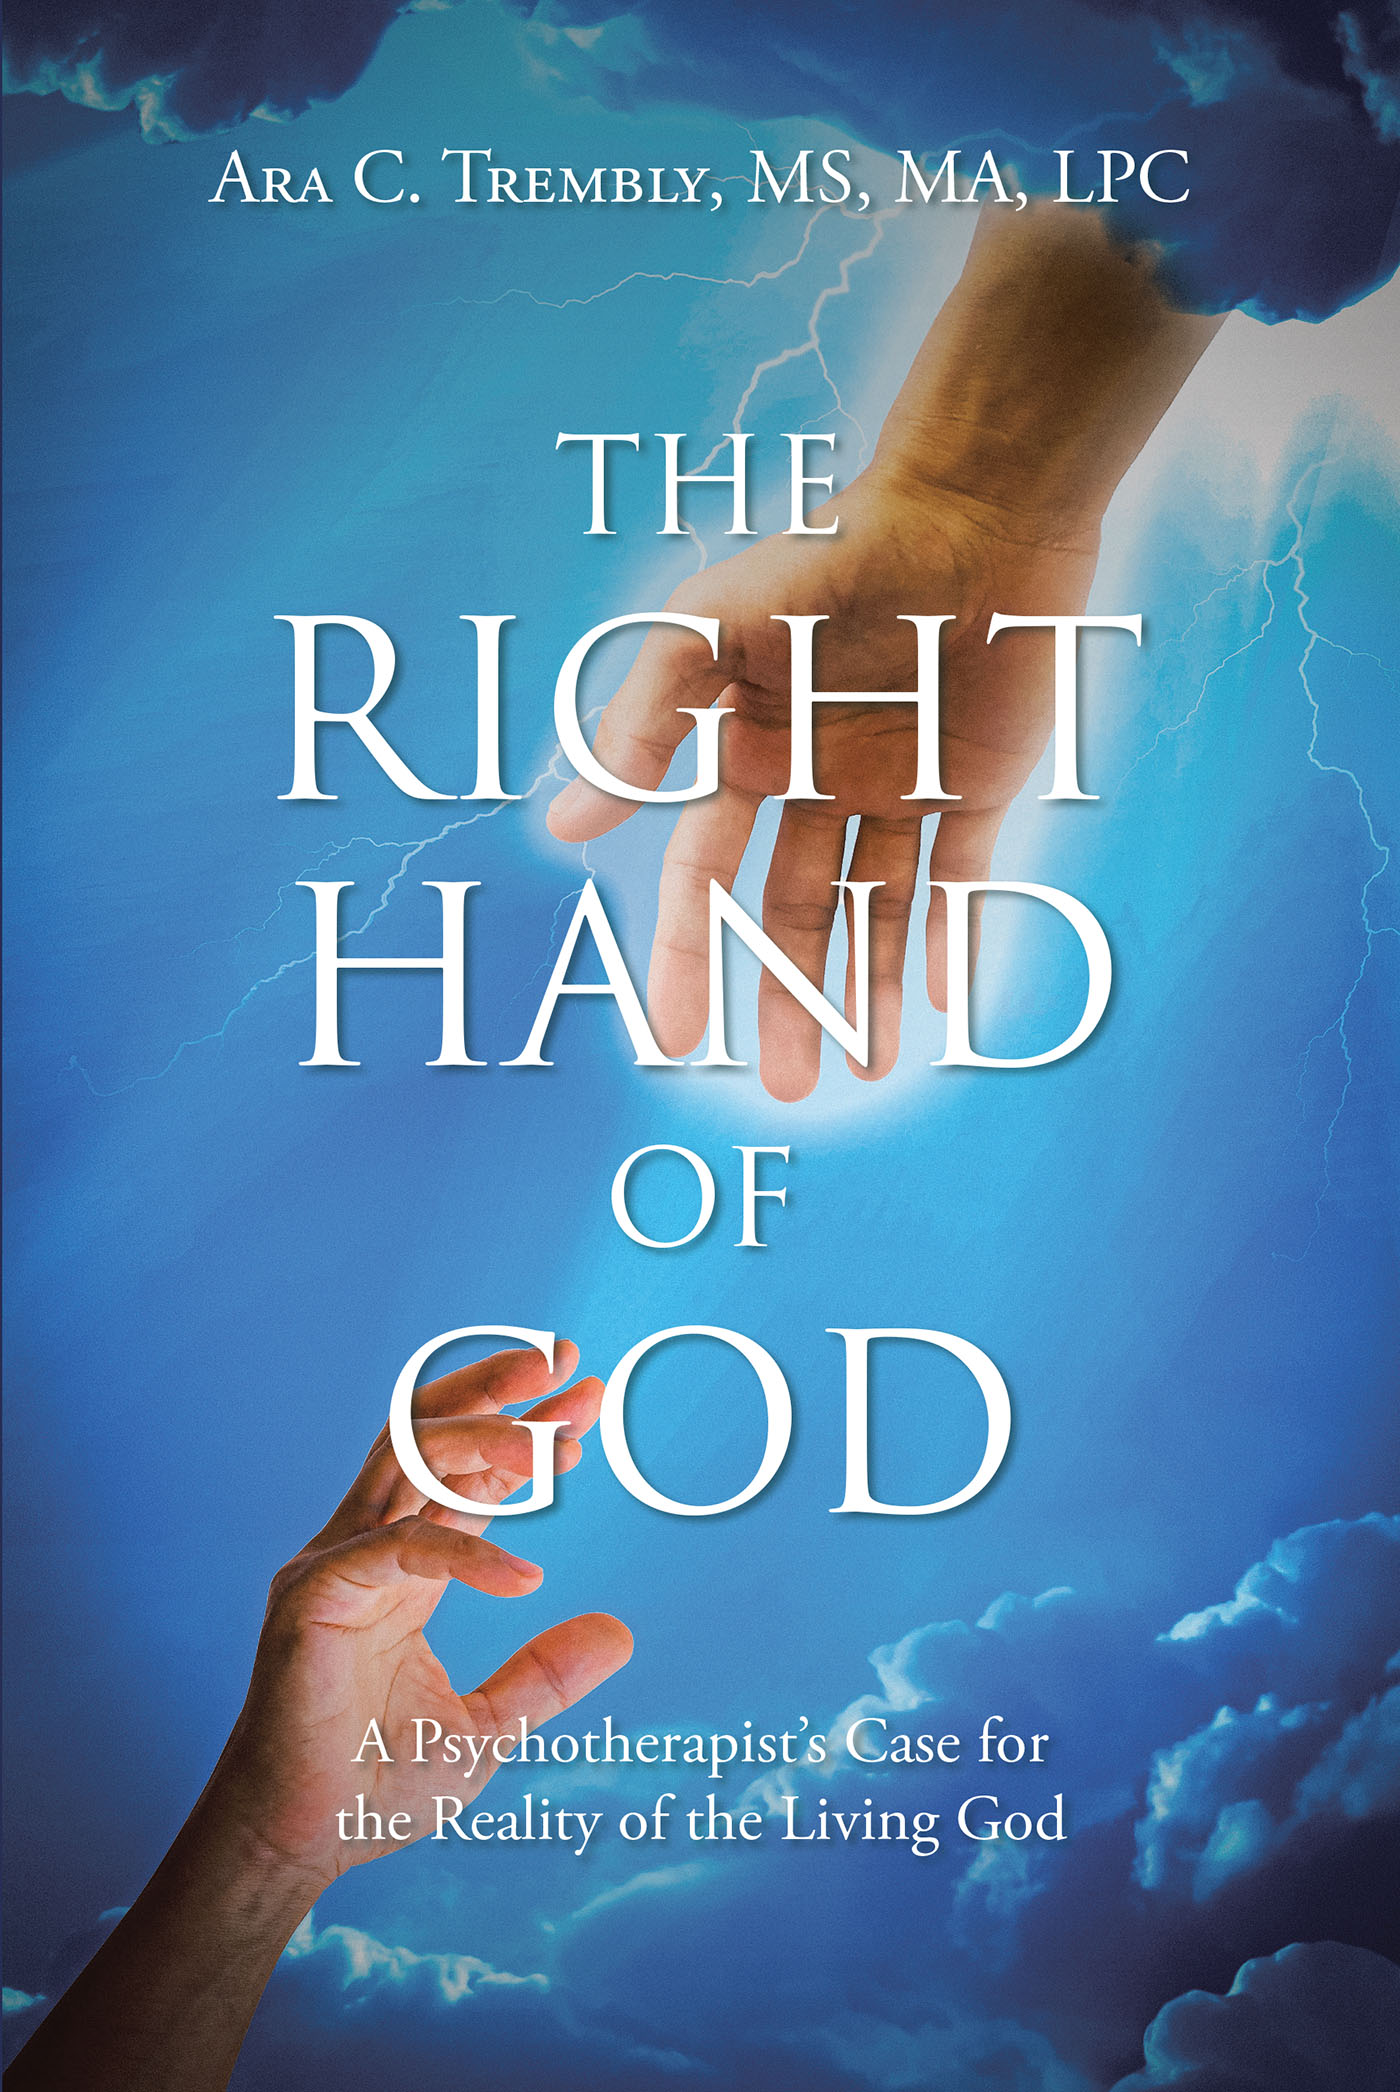 Ara C. Trembly, MS, MA, LPC’s Newly Released “The Right Hand of God” is a Compelling Discussion of the Realities of God